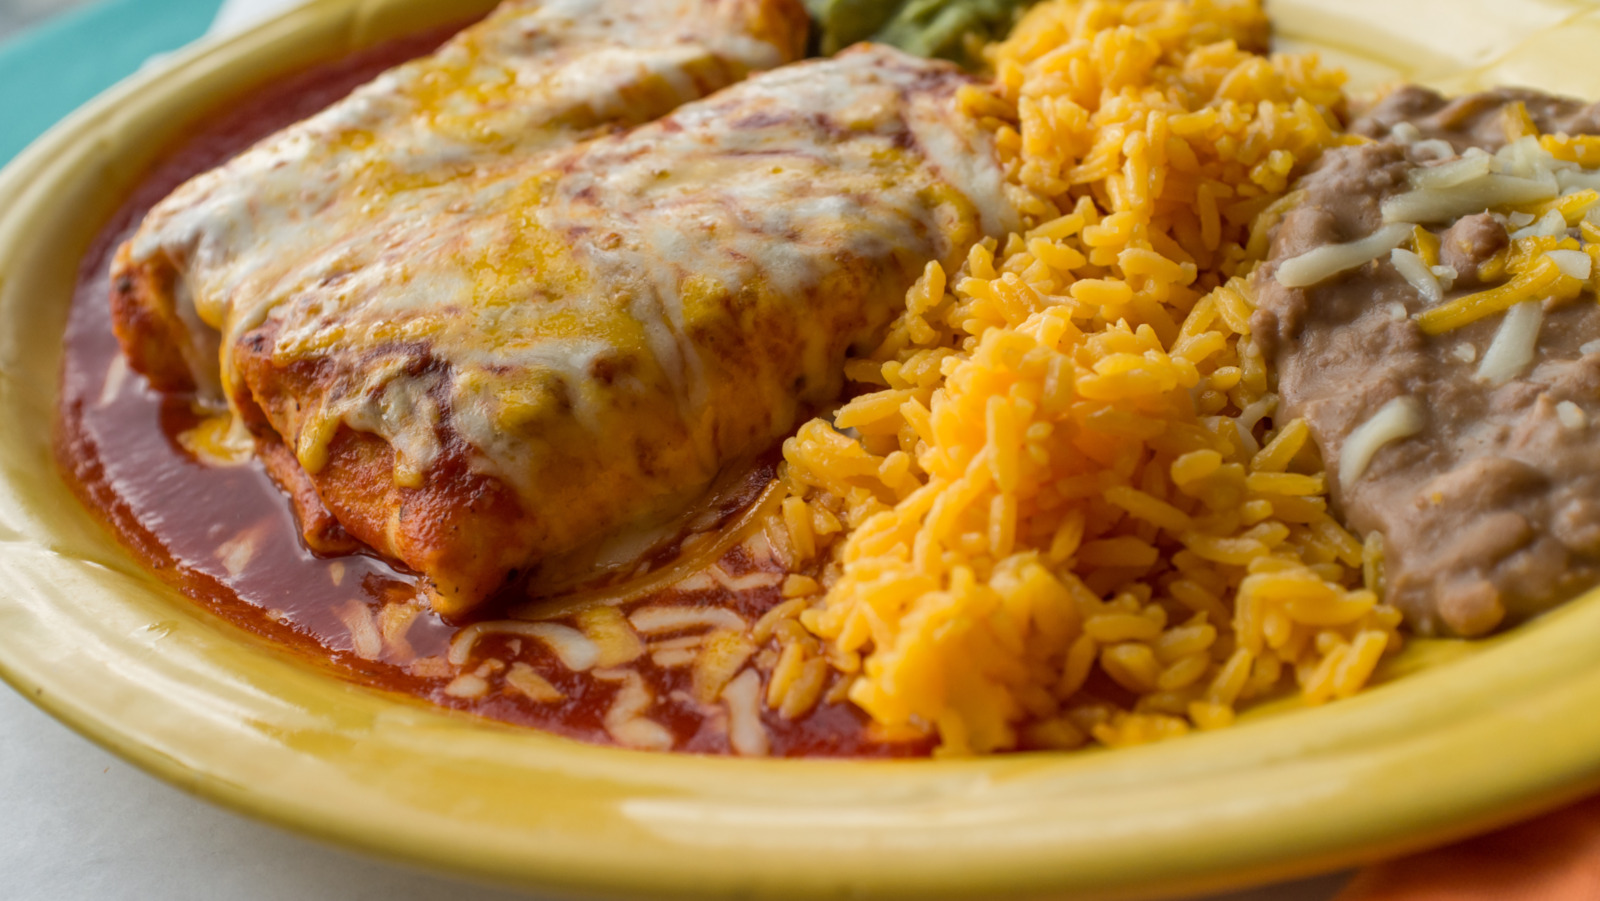 You Shouldn't Order Chimichangas At A Restaurant. Here's Why